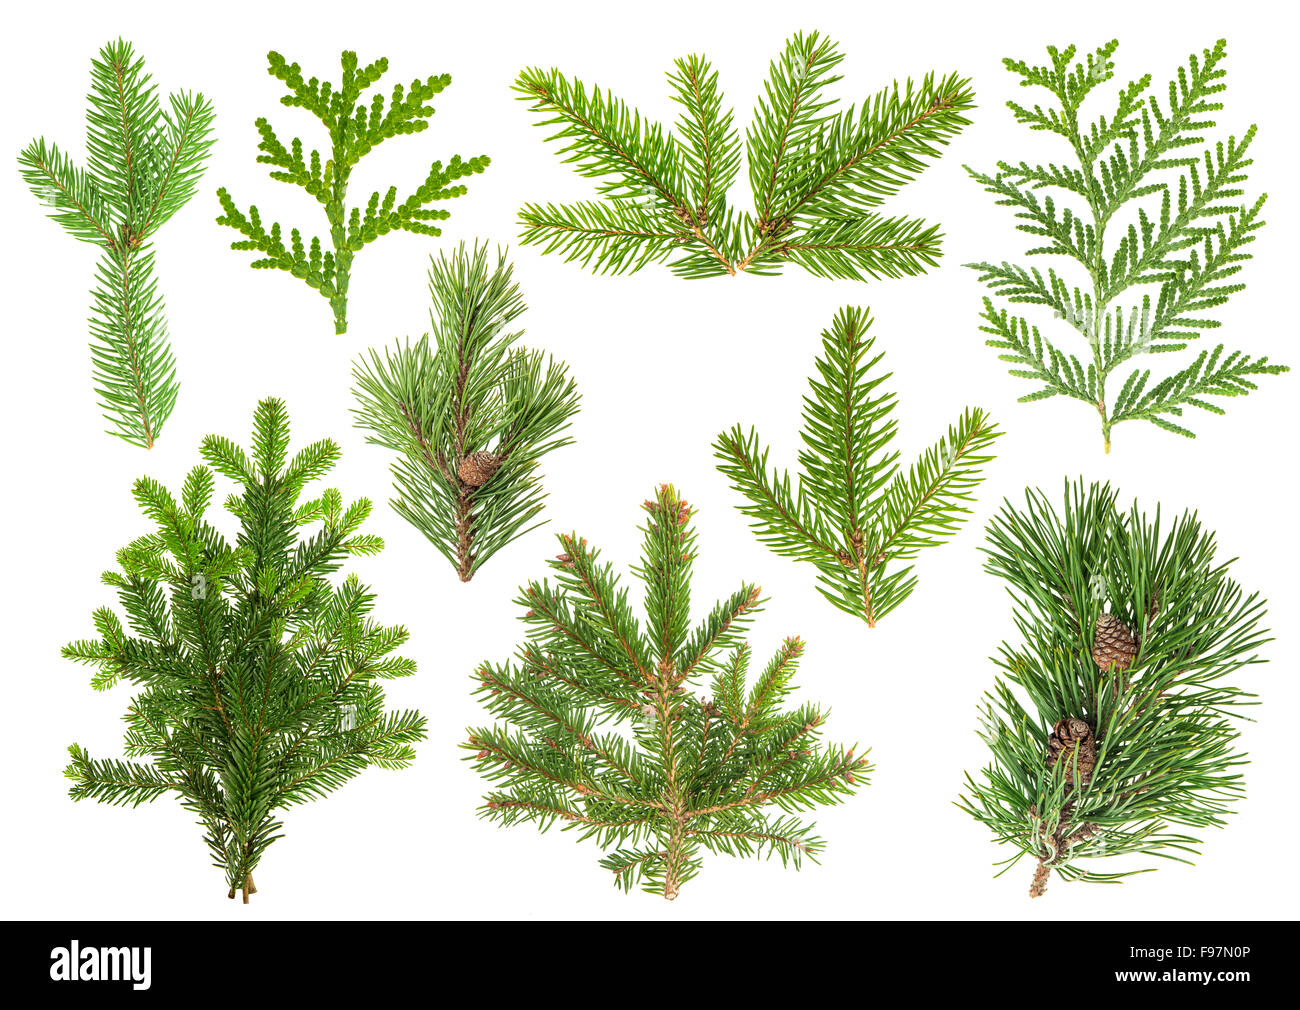 Set of evergreen coniferous tree branches isolated on white background. Stock Photo